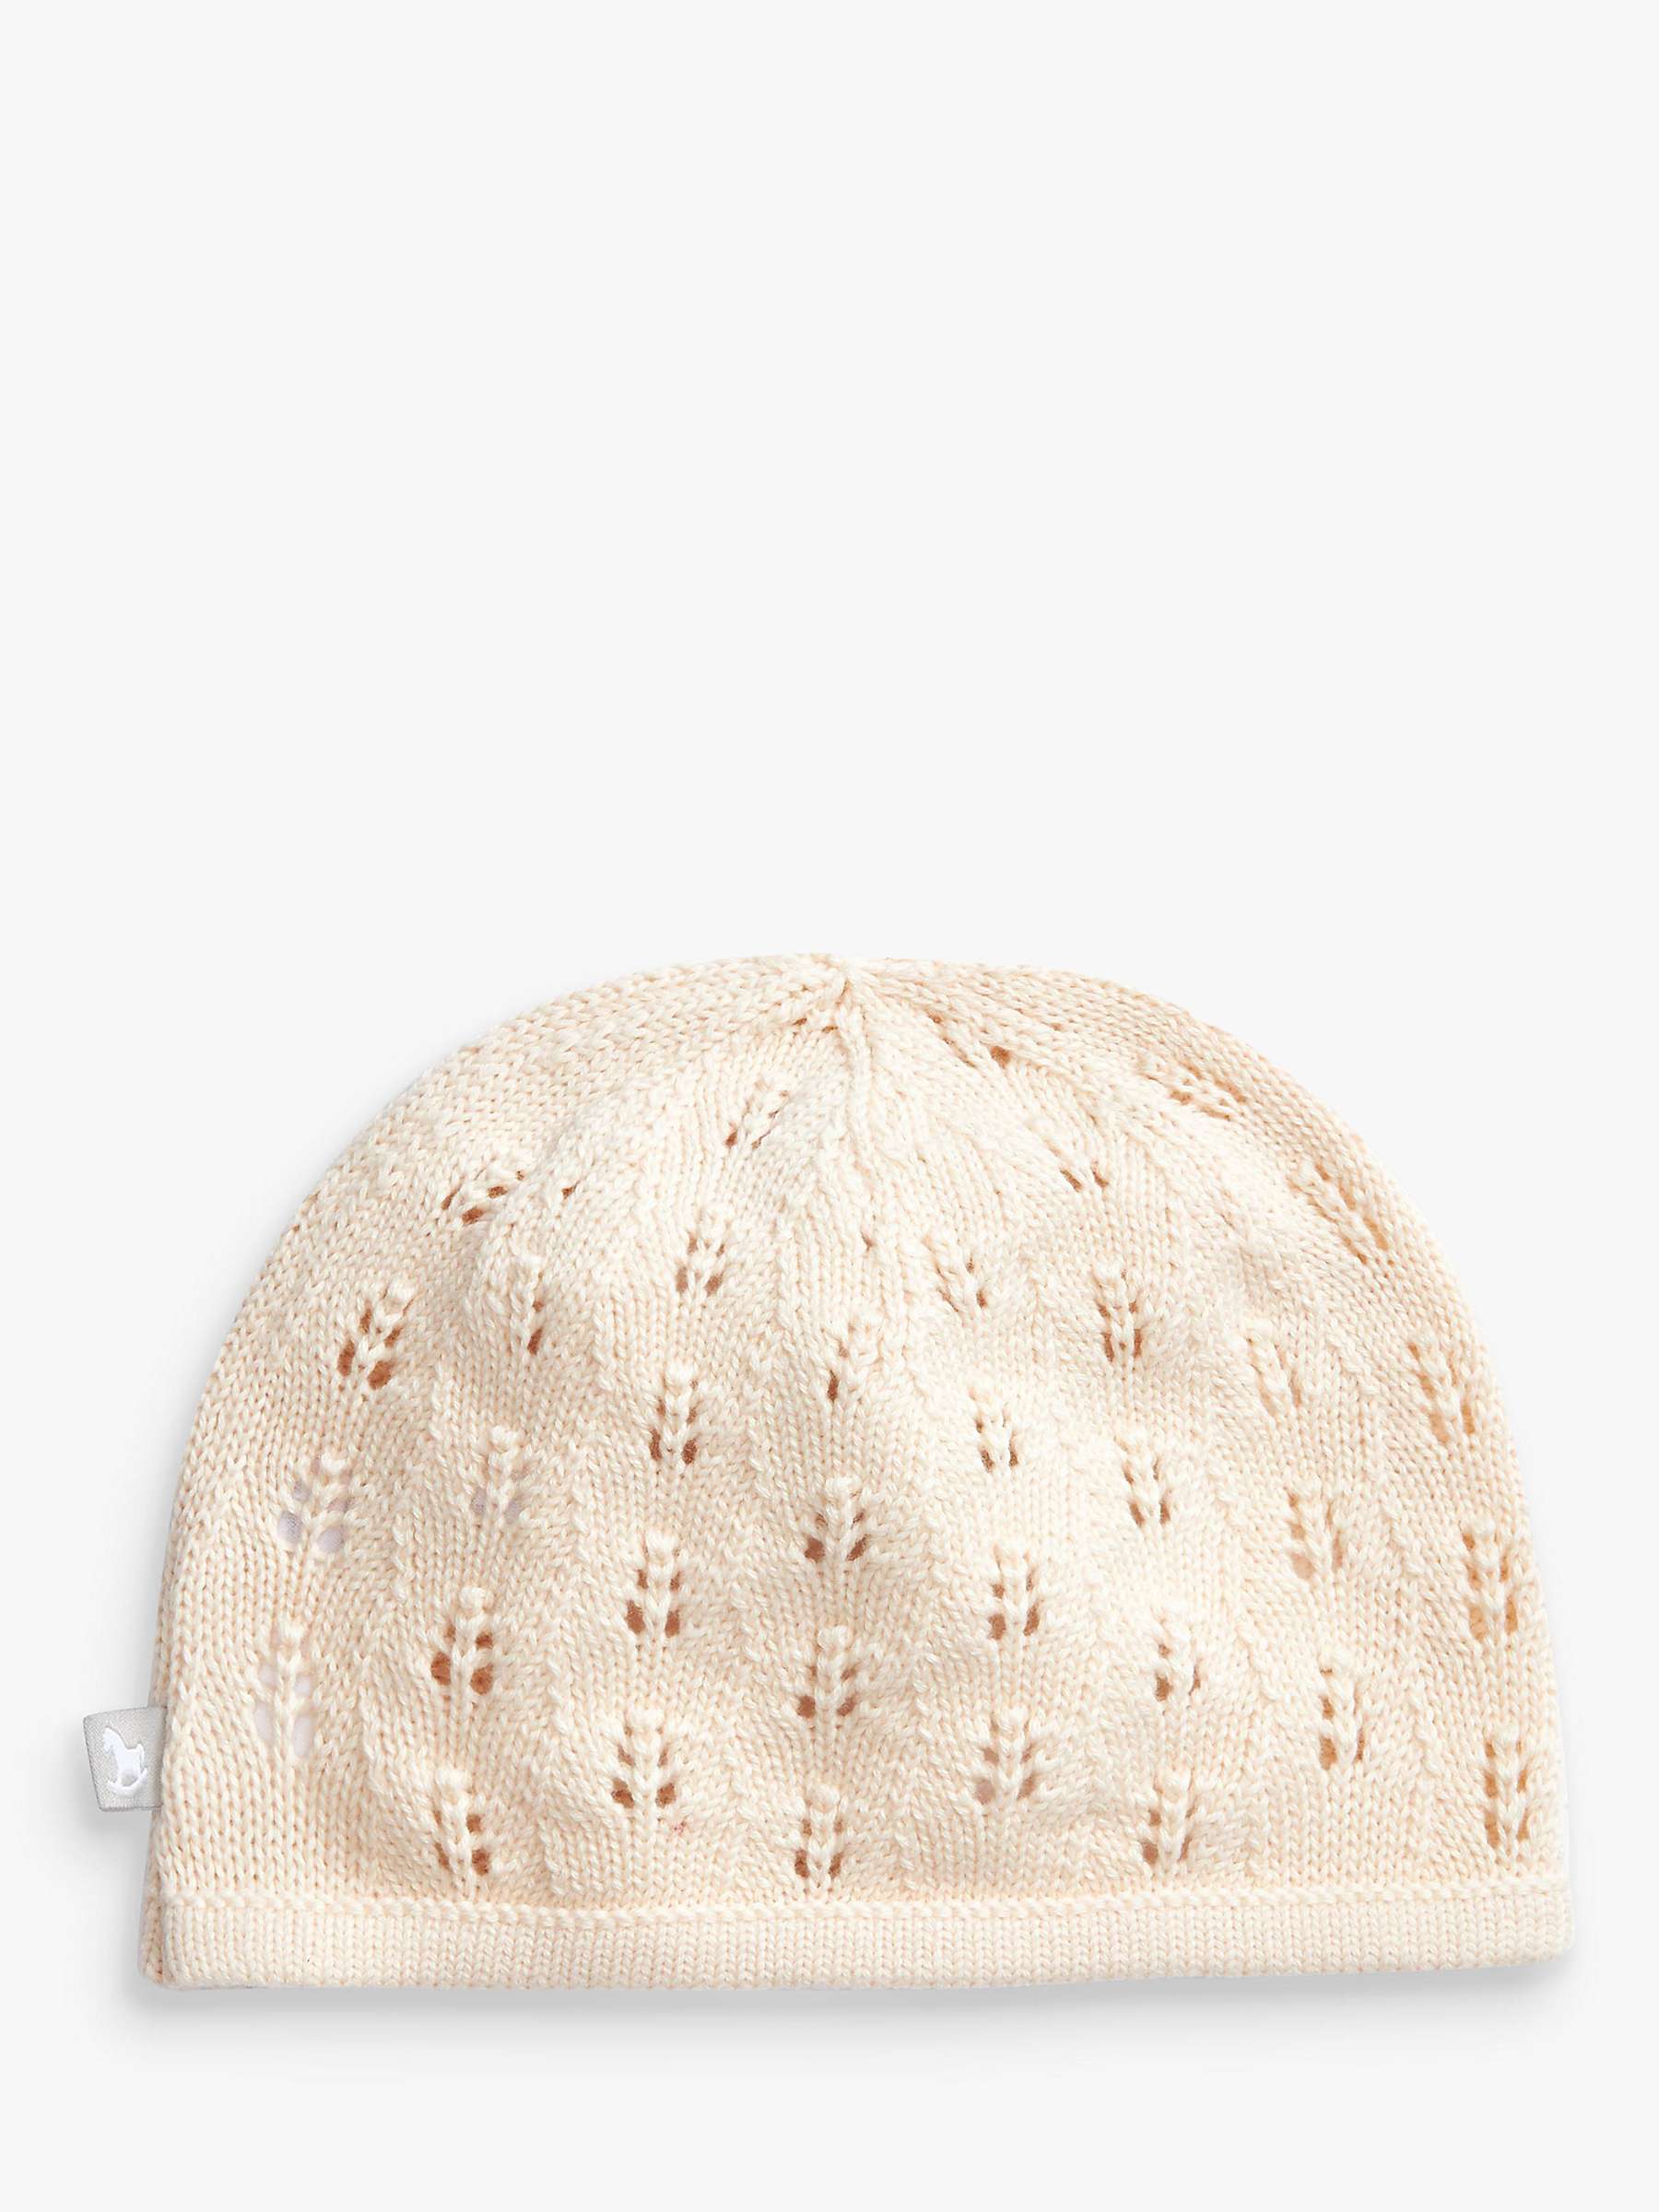 Buy The Little Tailor Pointelle Cotton Knit Baby Hat Online at johnlewis.com